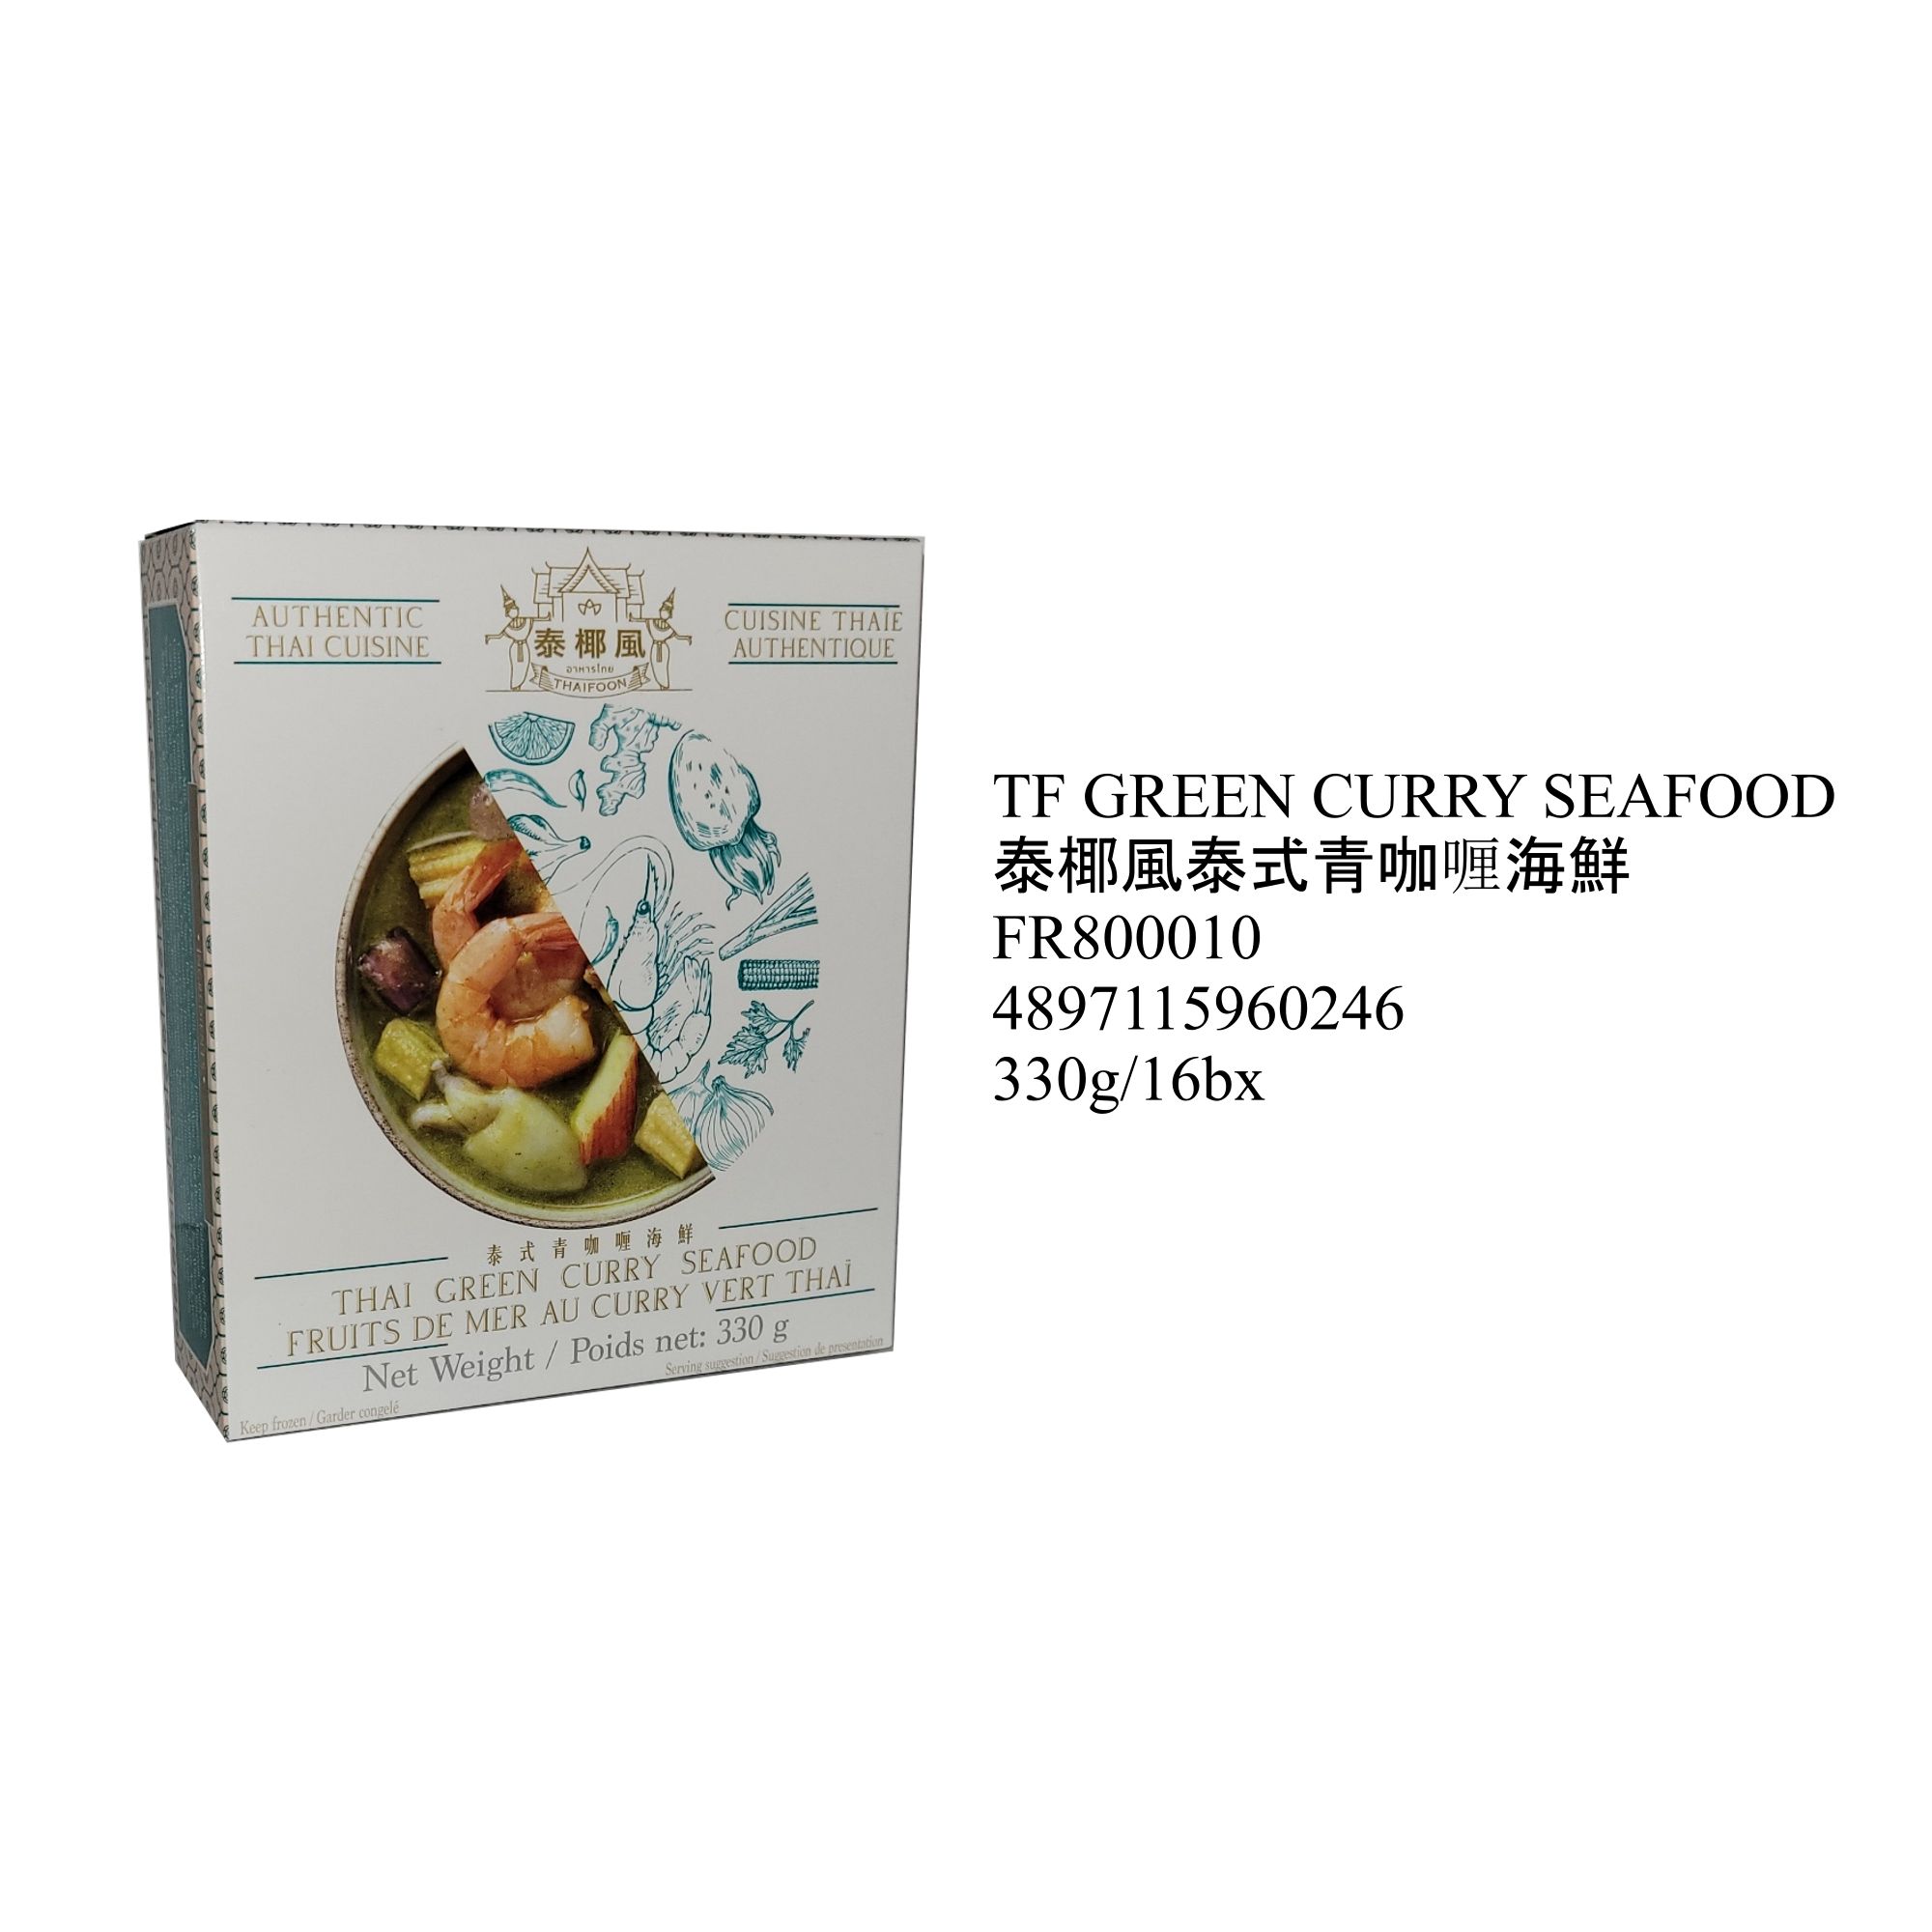 TF GREEN CURRY SEAFOOD FR800010